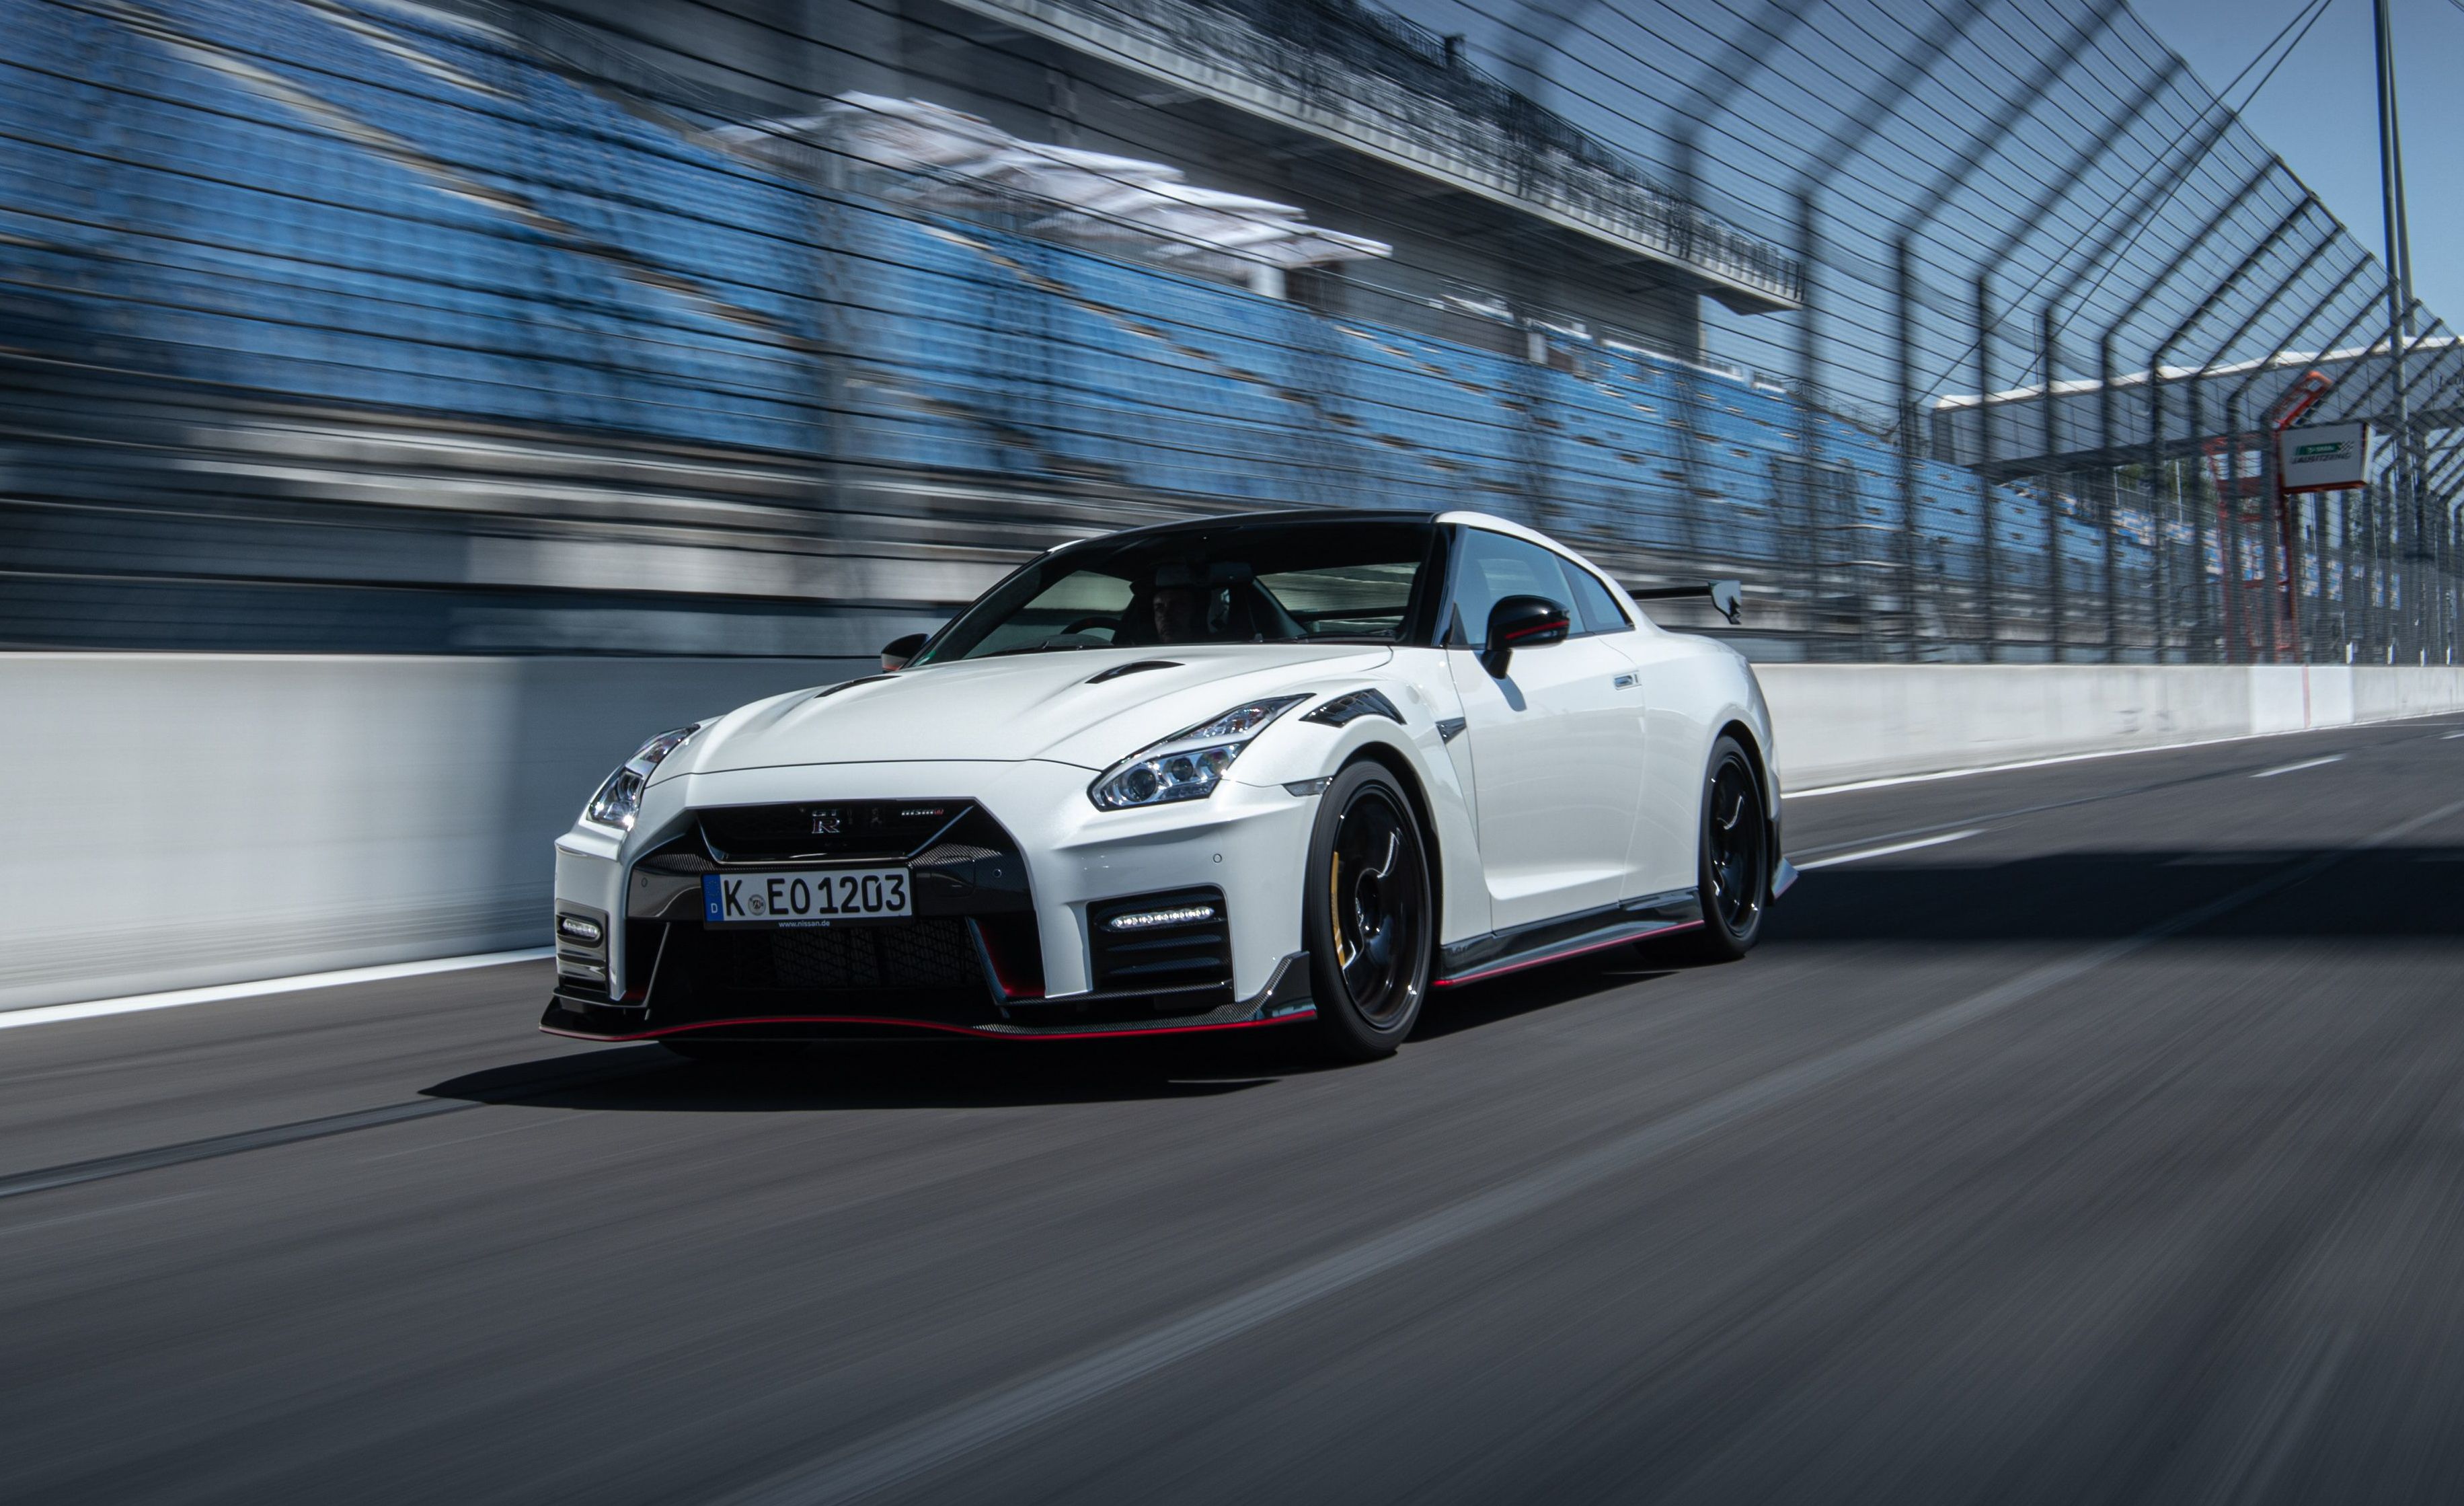 2020 Nissan GT-R Nismo: History, Specifications, & Performance